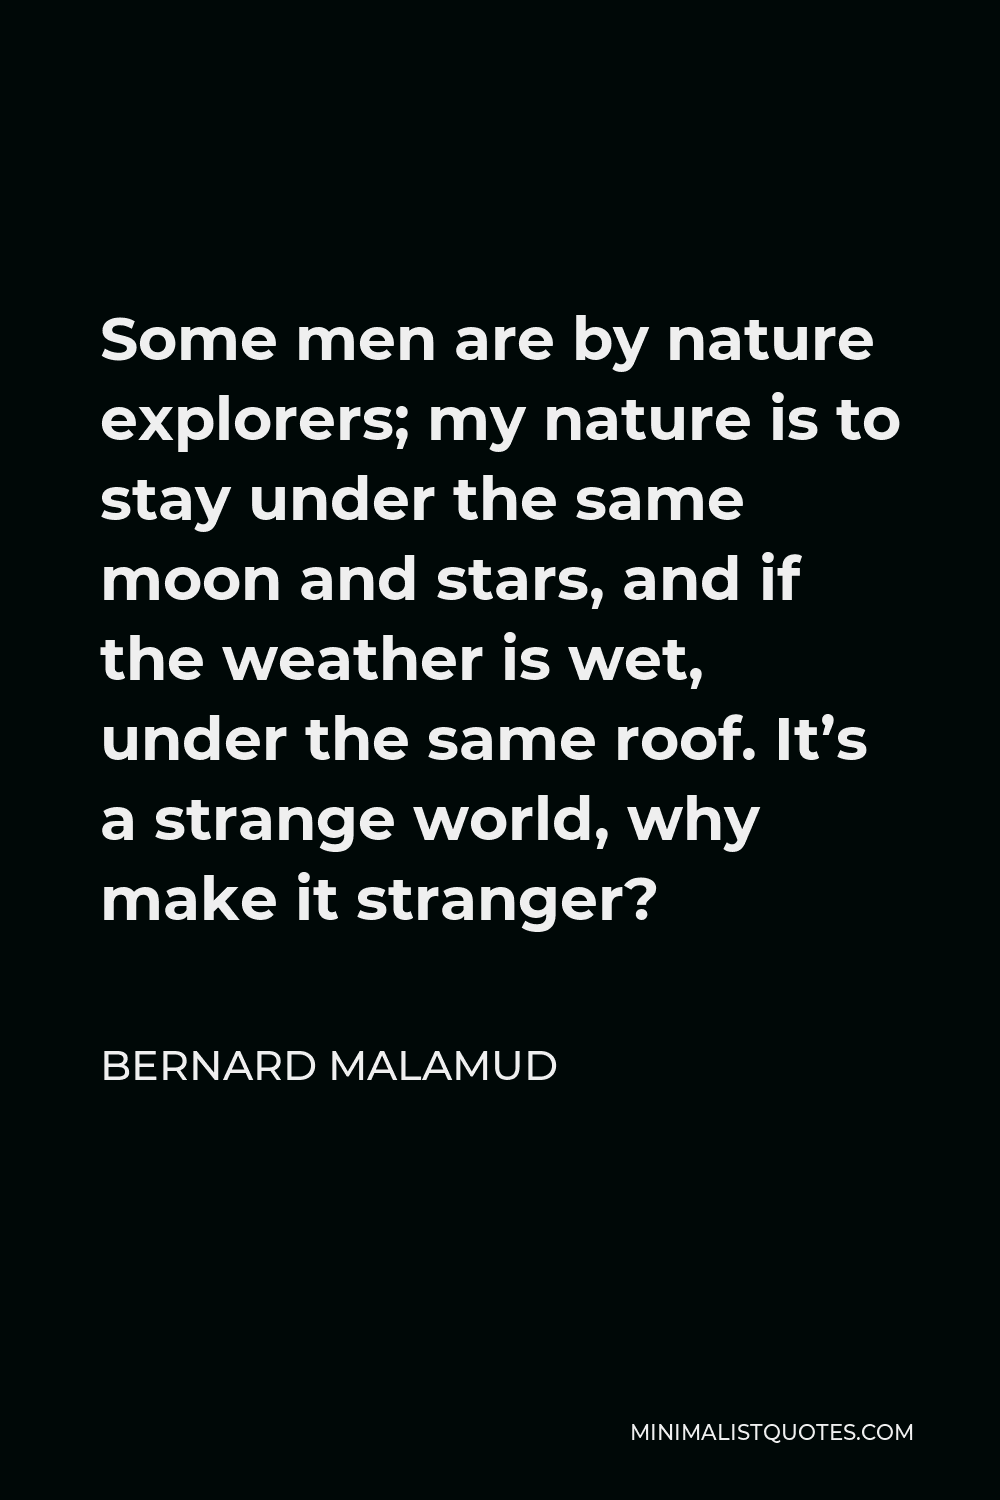 Bernard Malamud Quote - Some men are by nature explorers; my nature is to stay under the same moon and stars, and if the weather is wet, under the same roof. It’s a strange world, why make it stranger?